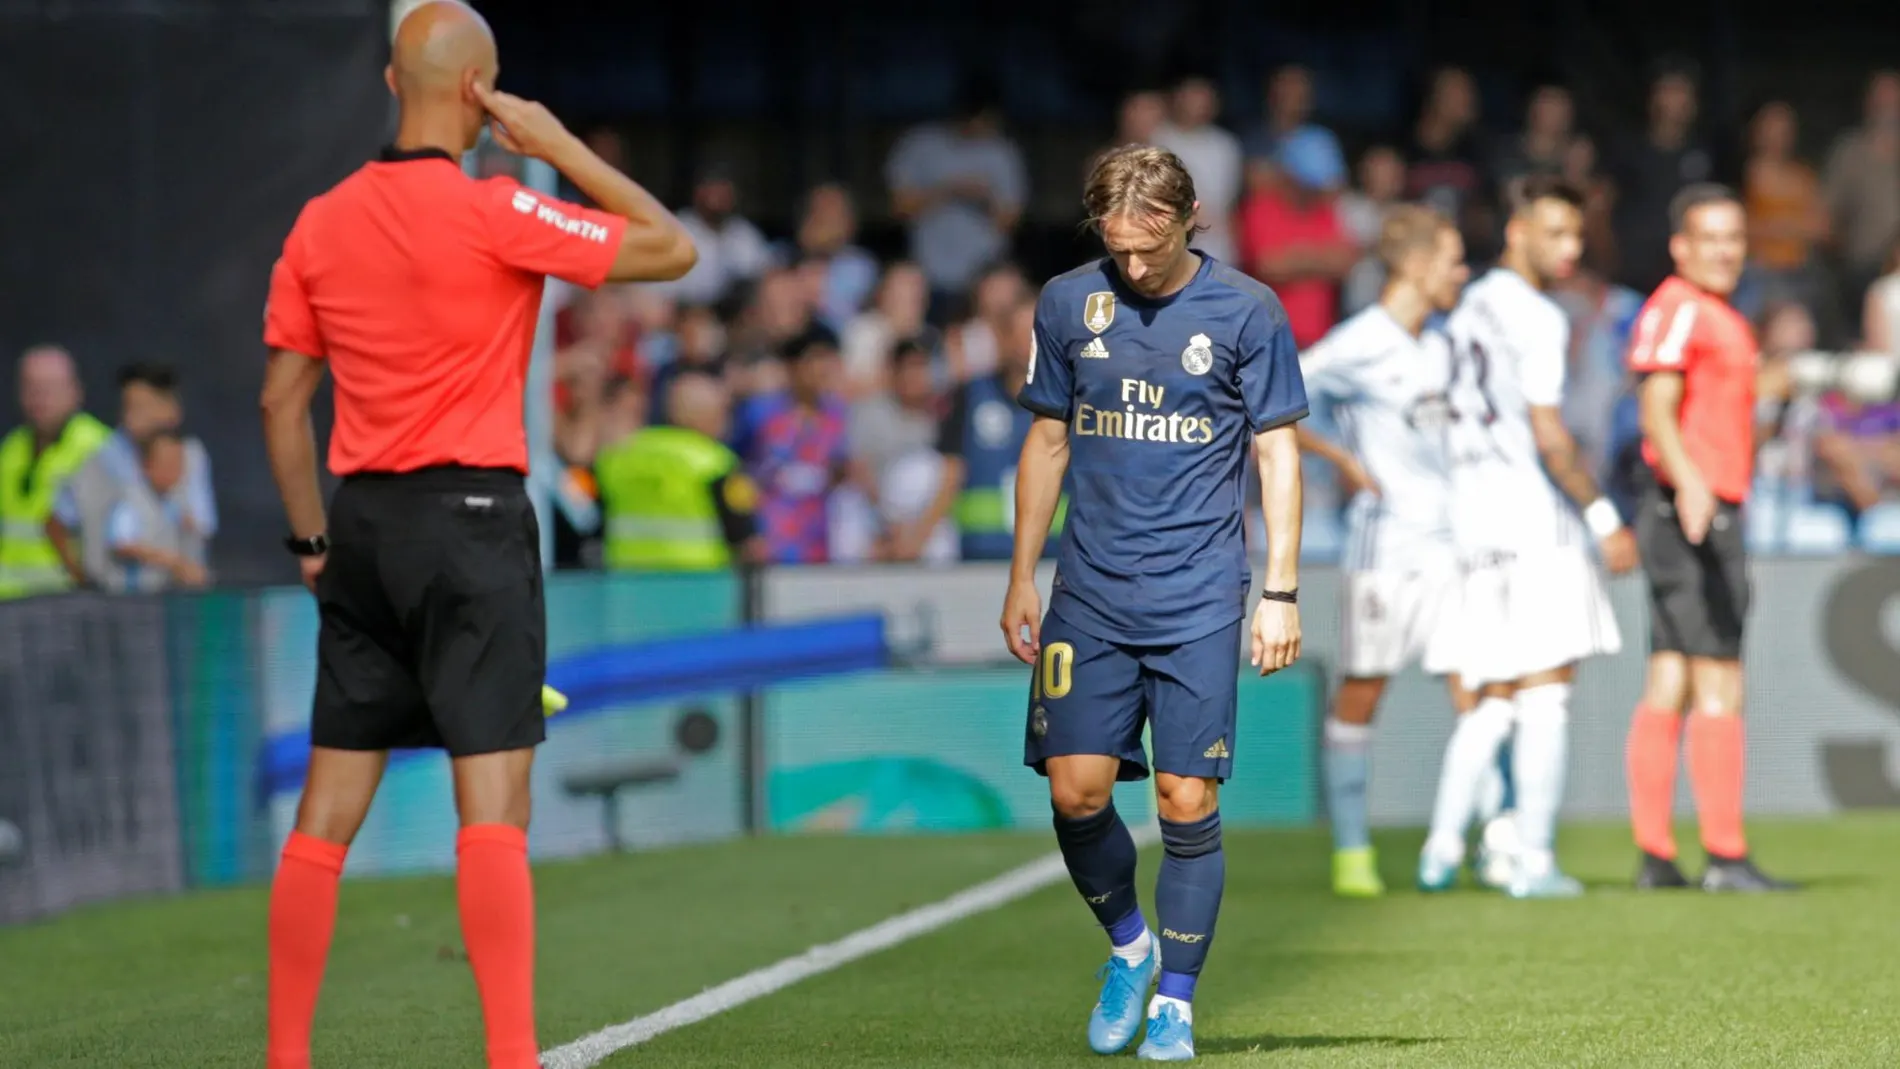 [2019 Real Madrid's Luka Modric after being sent off by referee Javier Fernandez REUTERS/Miguel]